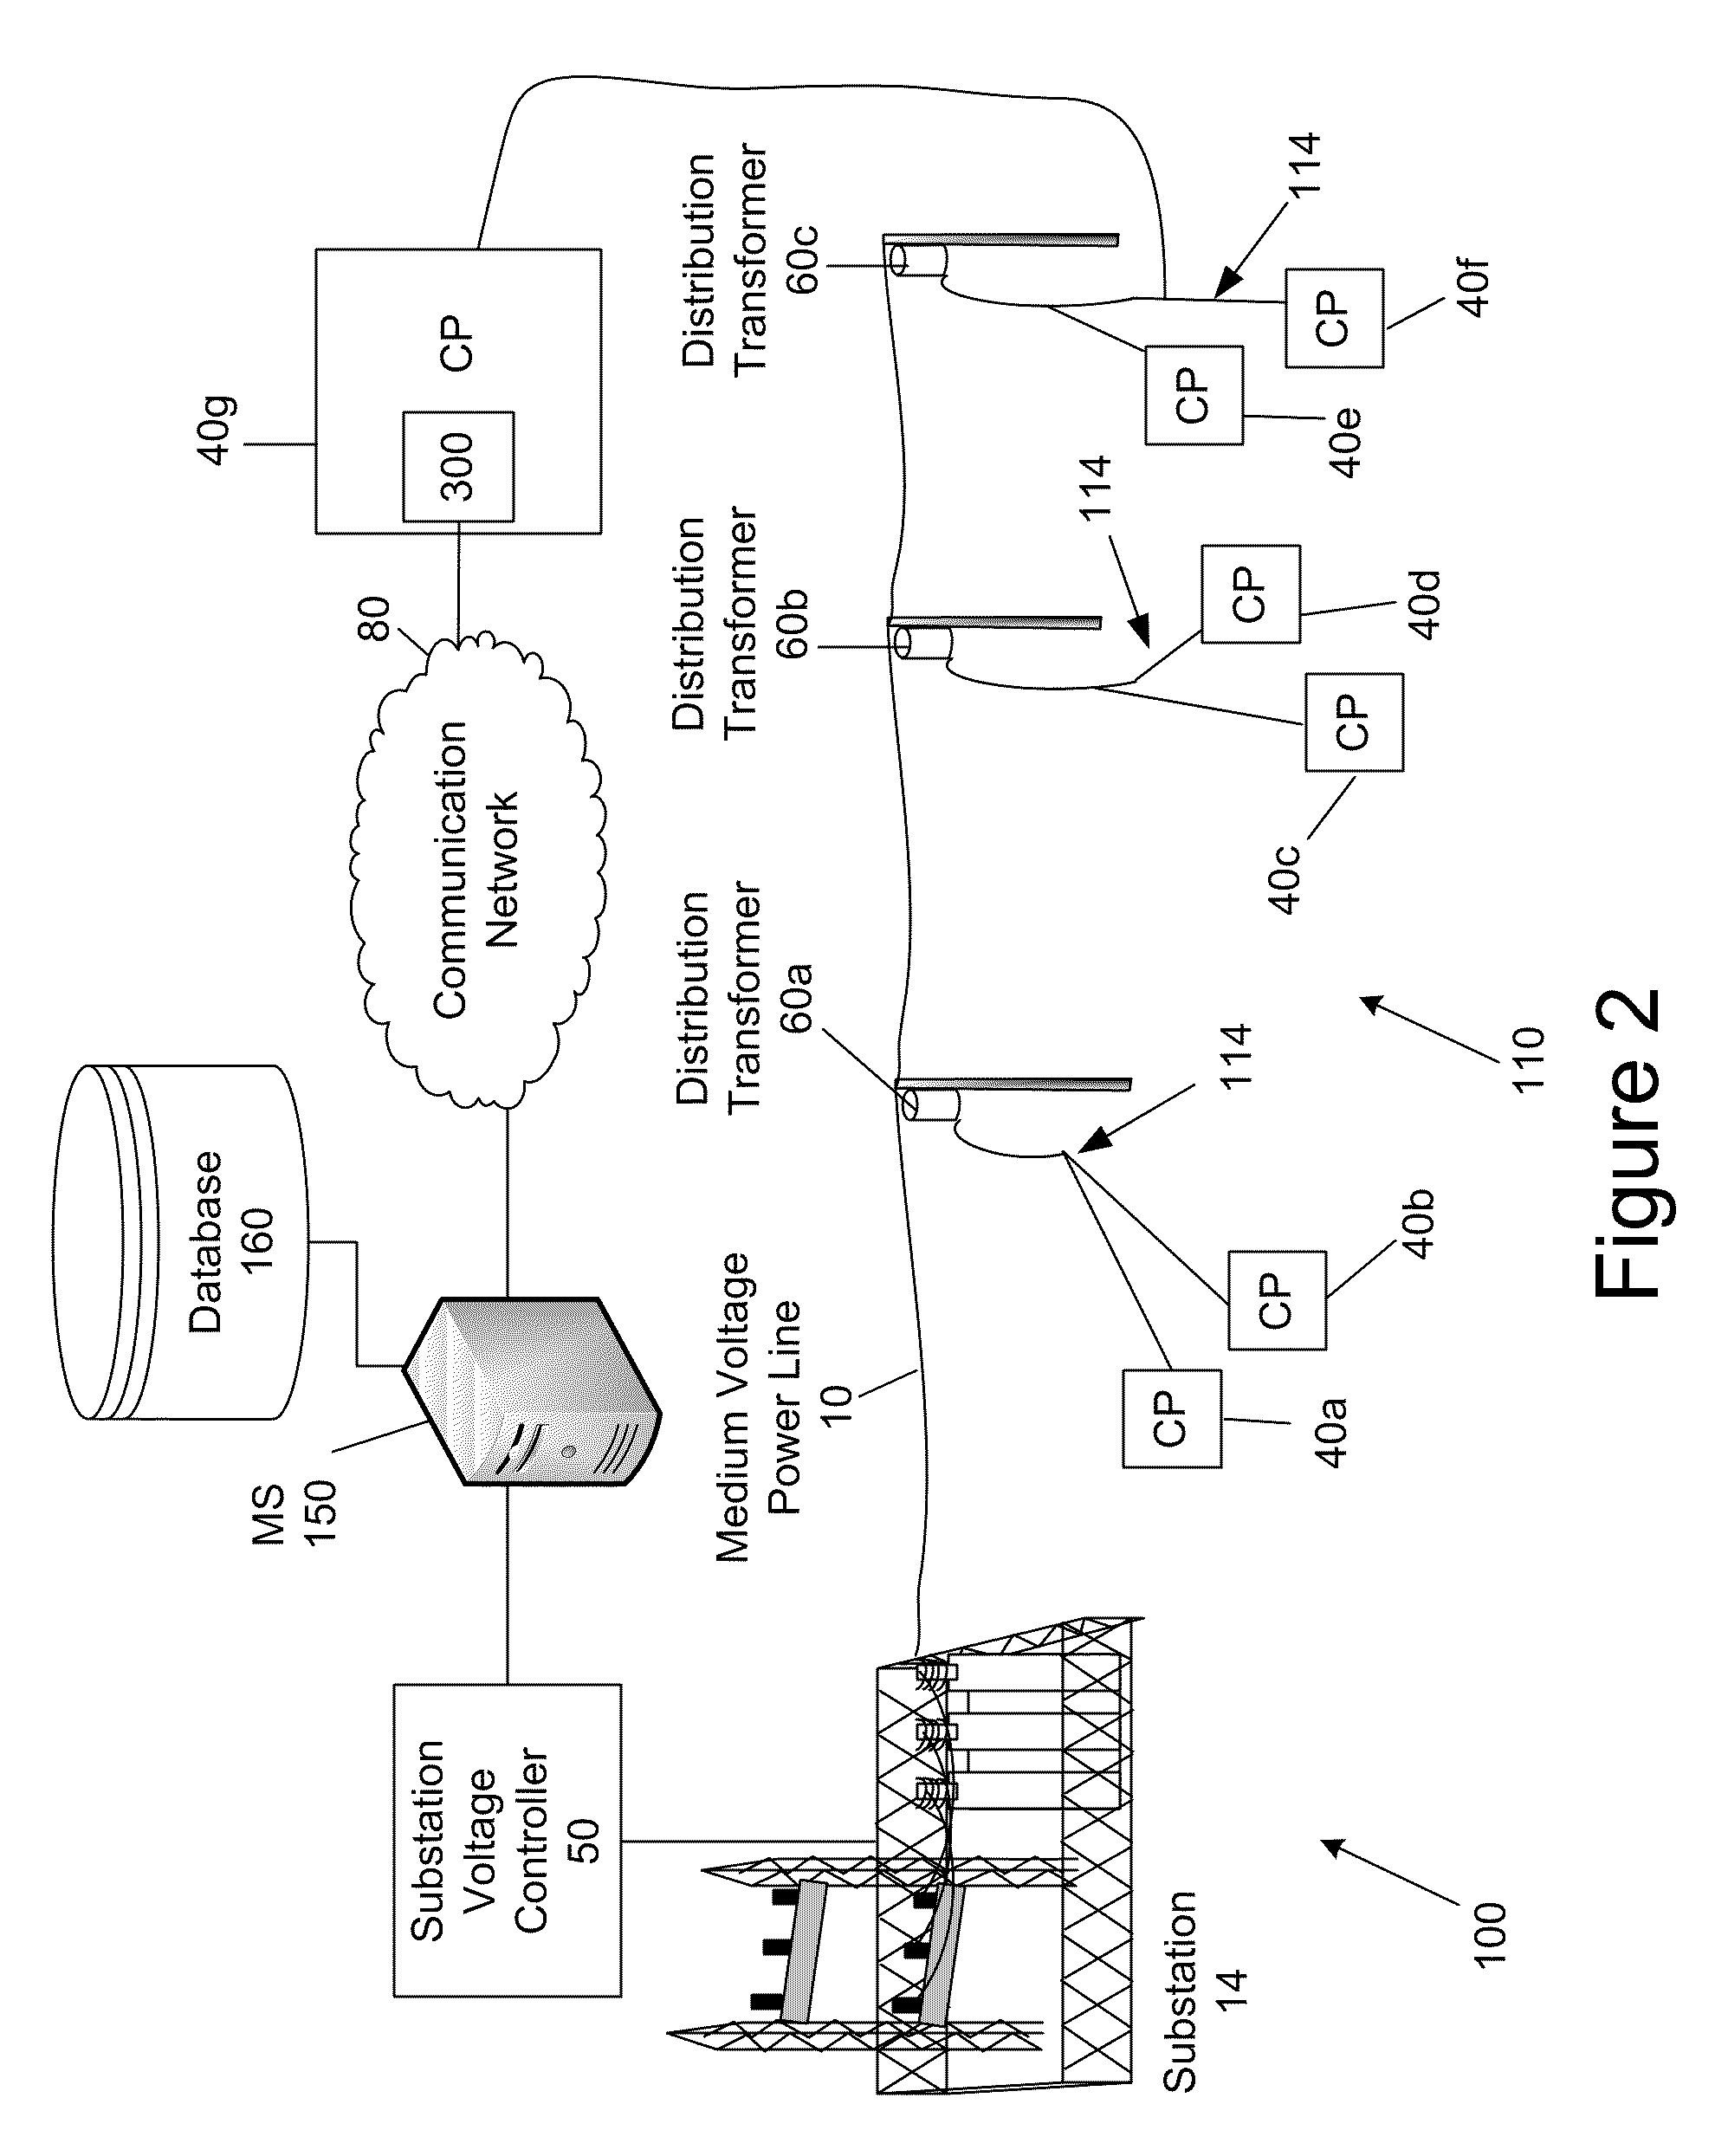 System and Method for Providing Voltage Regulation in a Power Distribution System